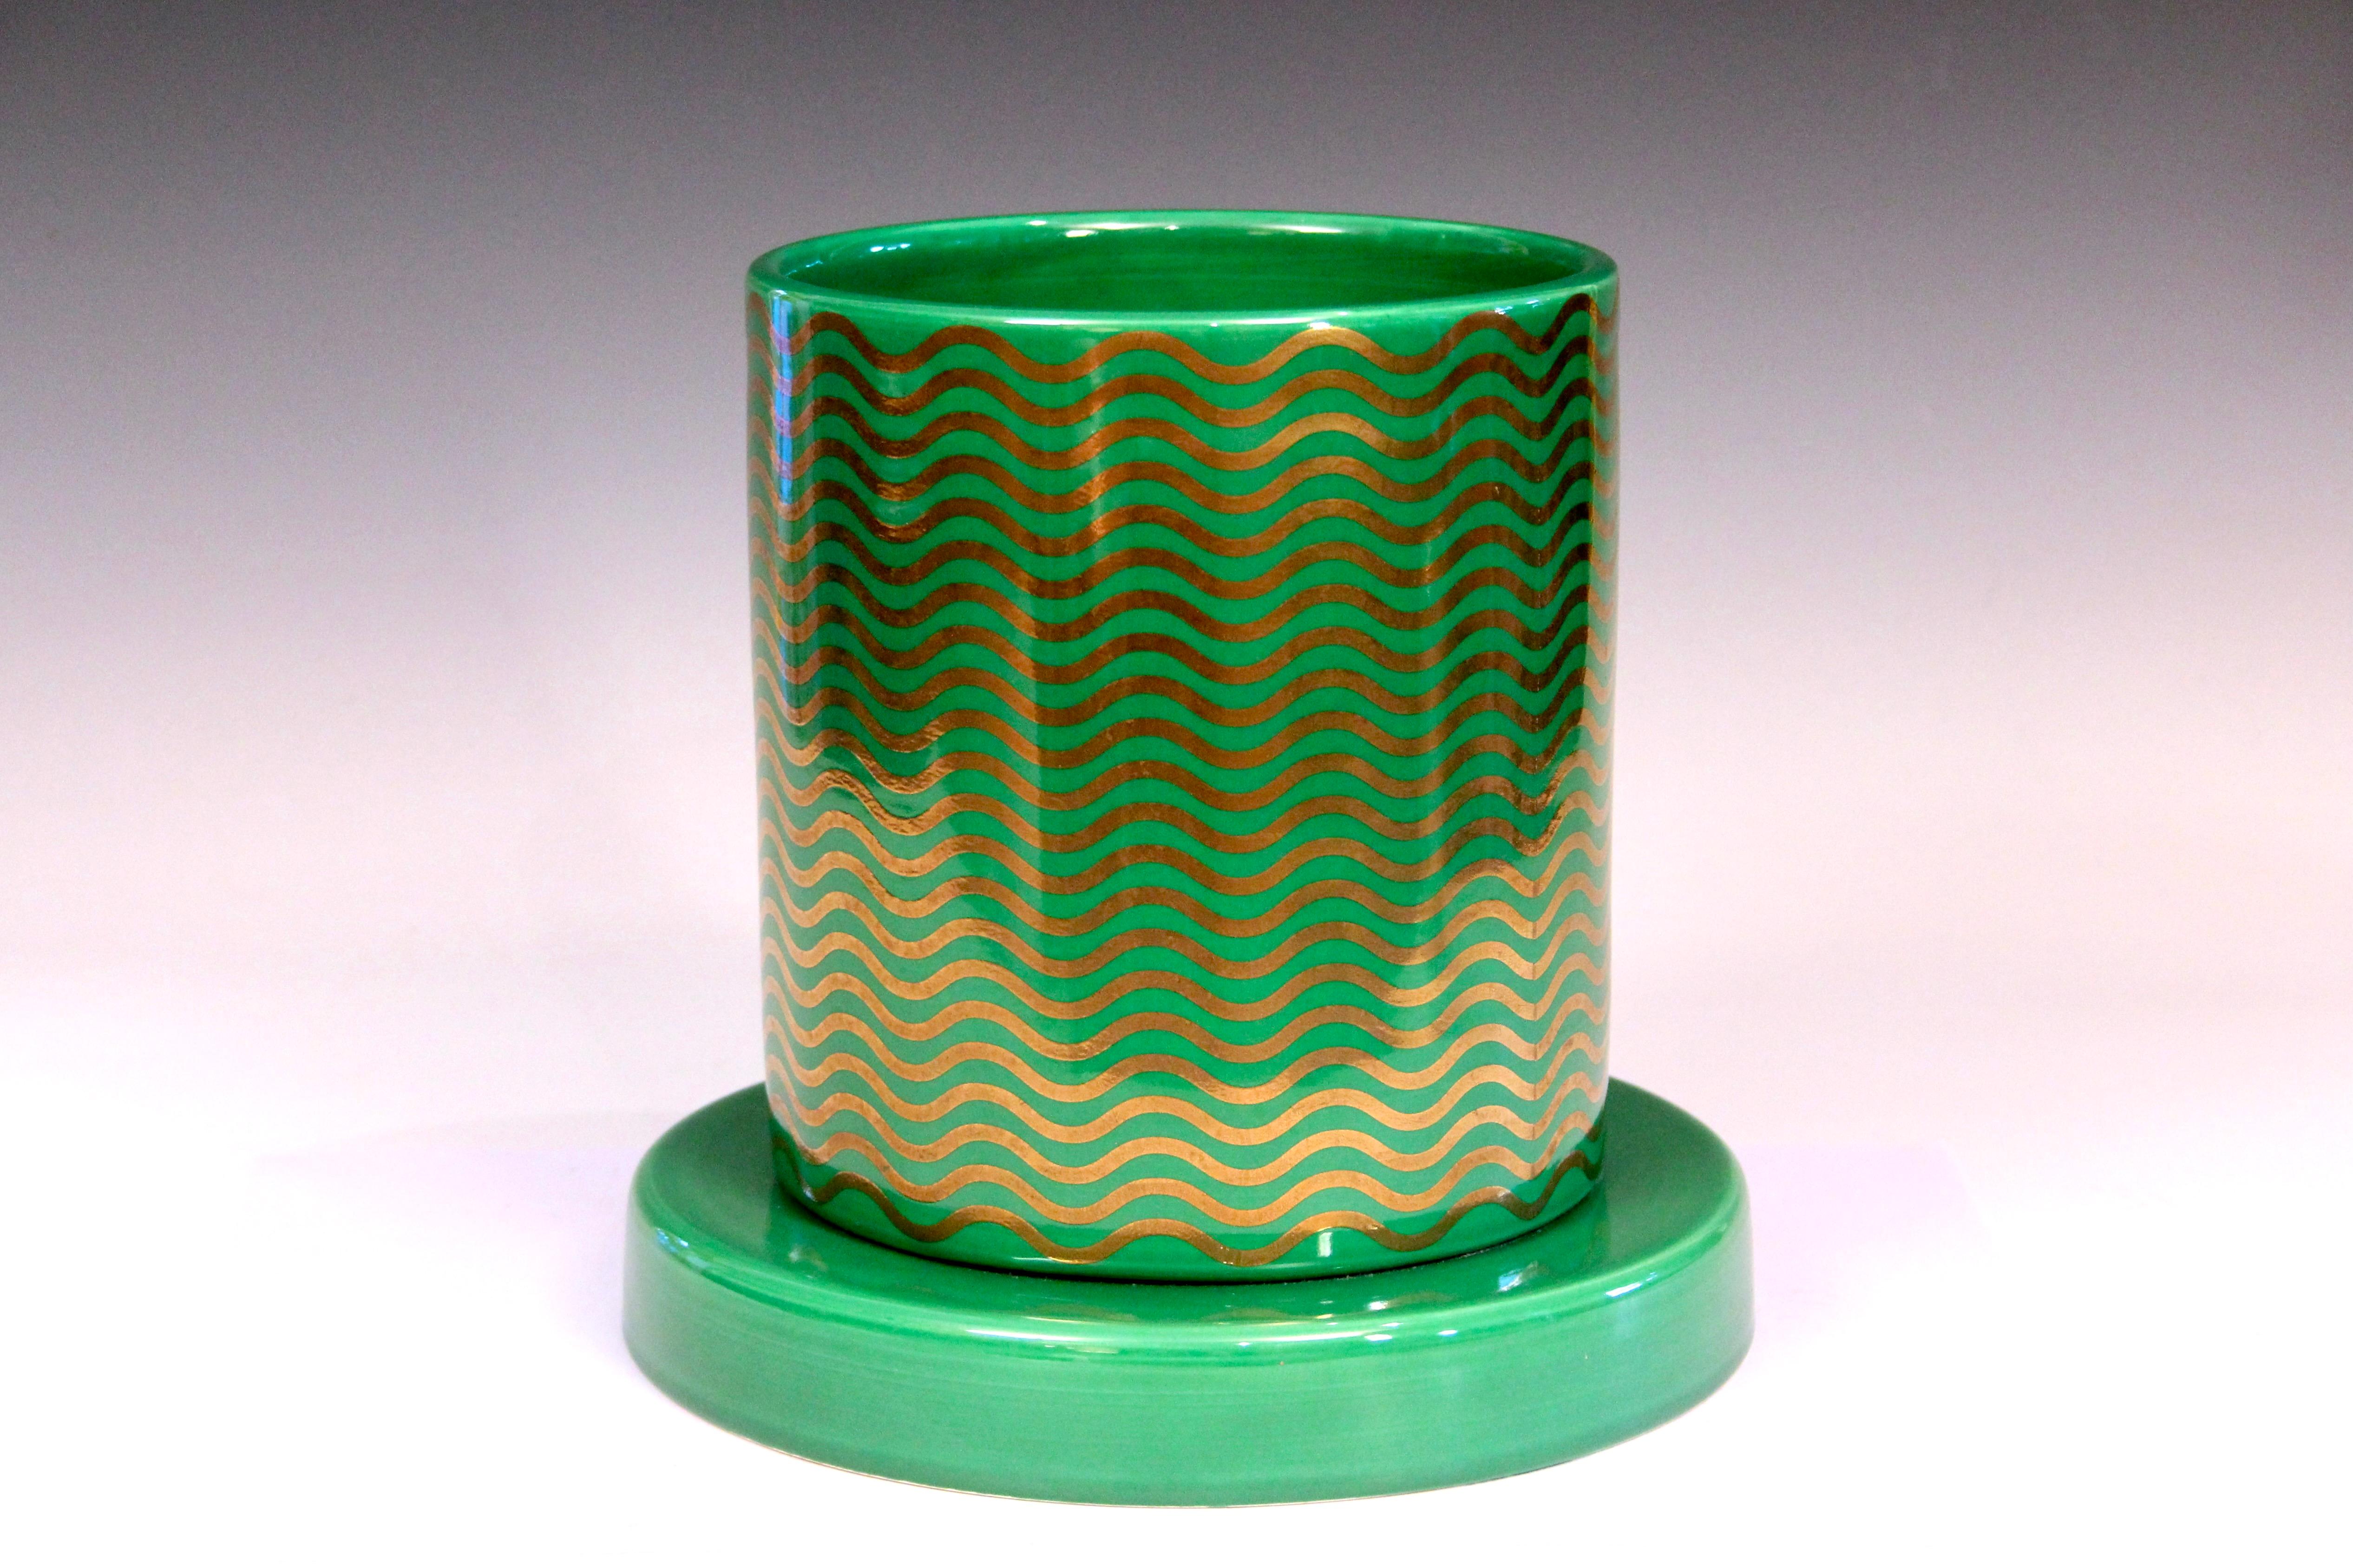 Post-Modern Ettore Sottsass Vase Mediterraneo Green Gilt Waves Lavori in Corso Signed Dated For Sale